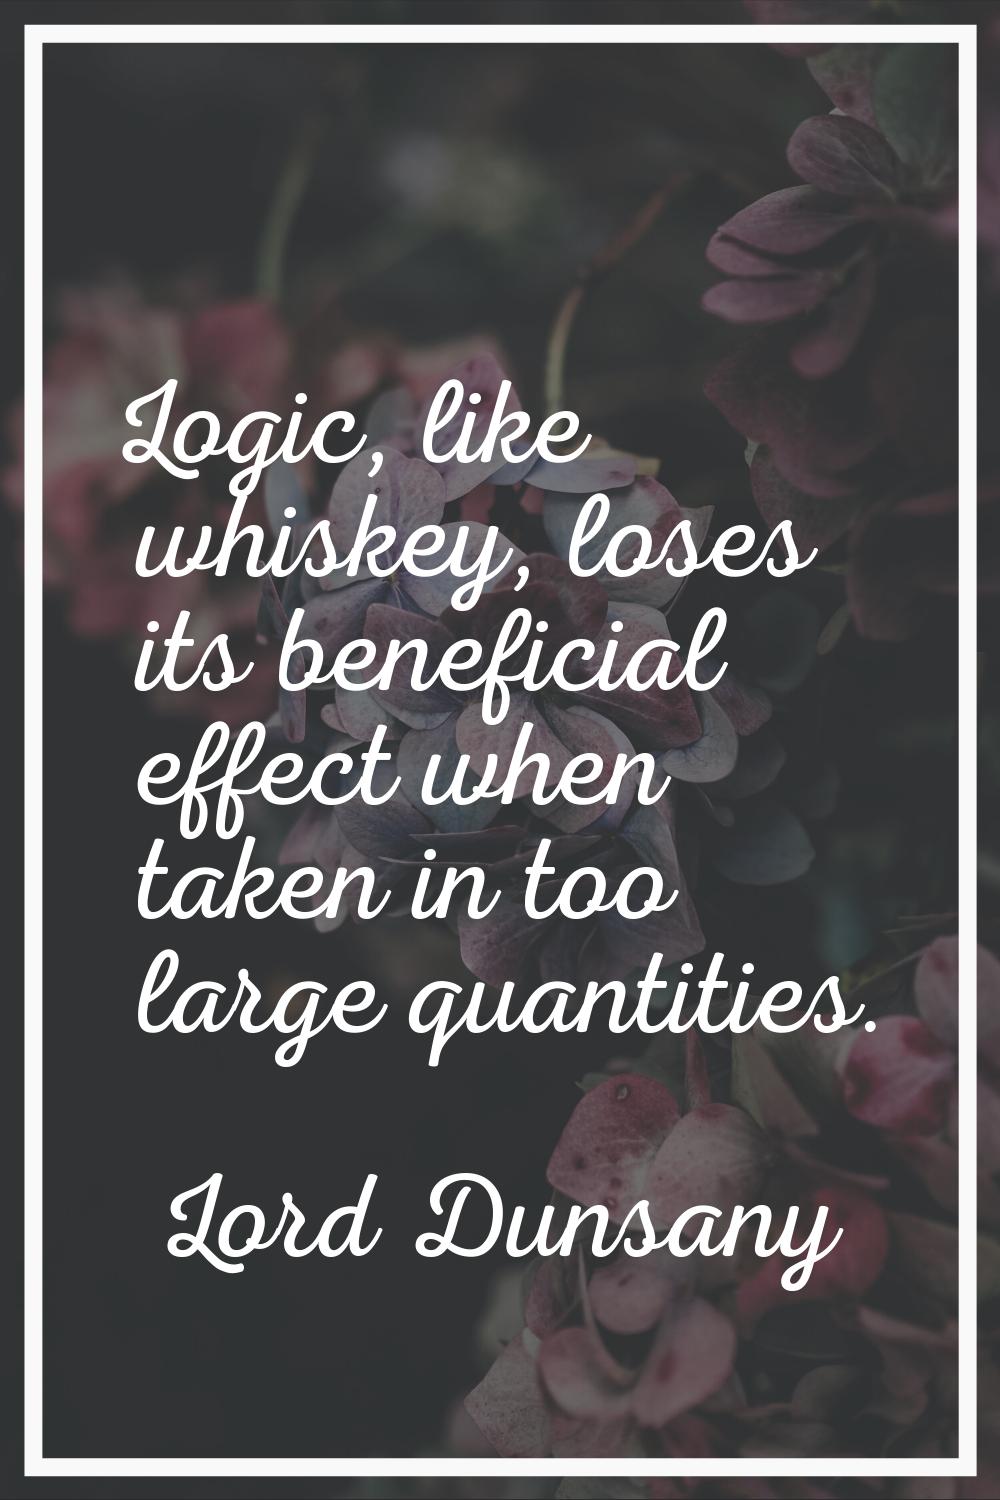 Logic, like whiskey, loses its beneficial effect when taken in too large quantities.